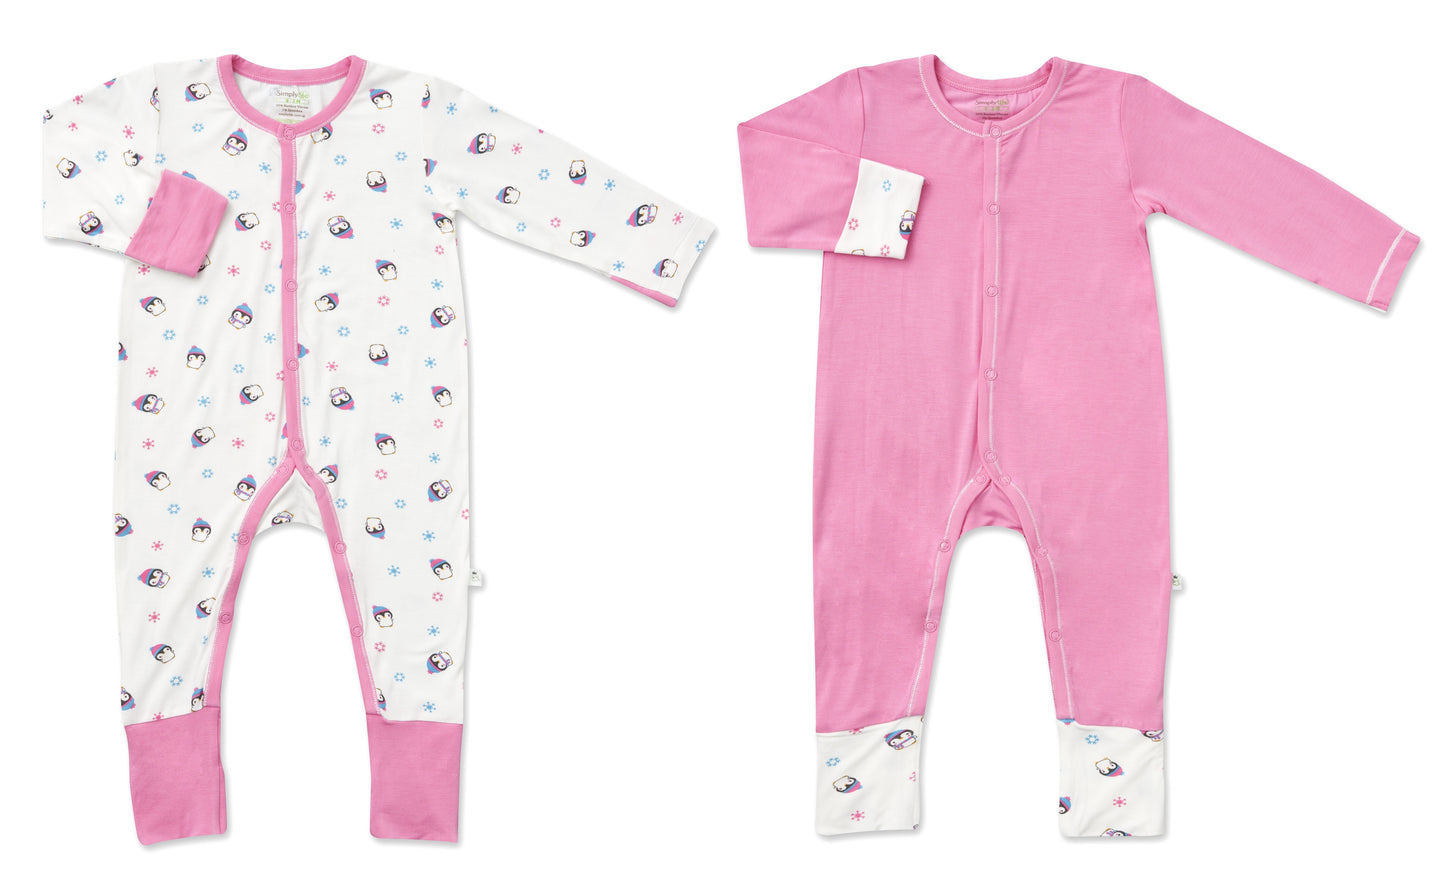 Cute Penguin & Pink - Long-sleeved Snap Button Sleepsuit with Convertible Cuffs / Mittens & Footie (Value Pack of 2)